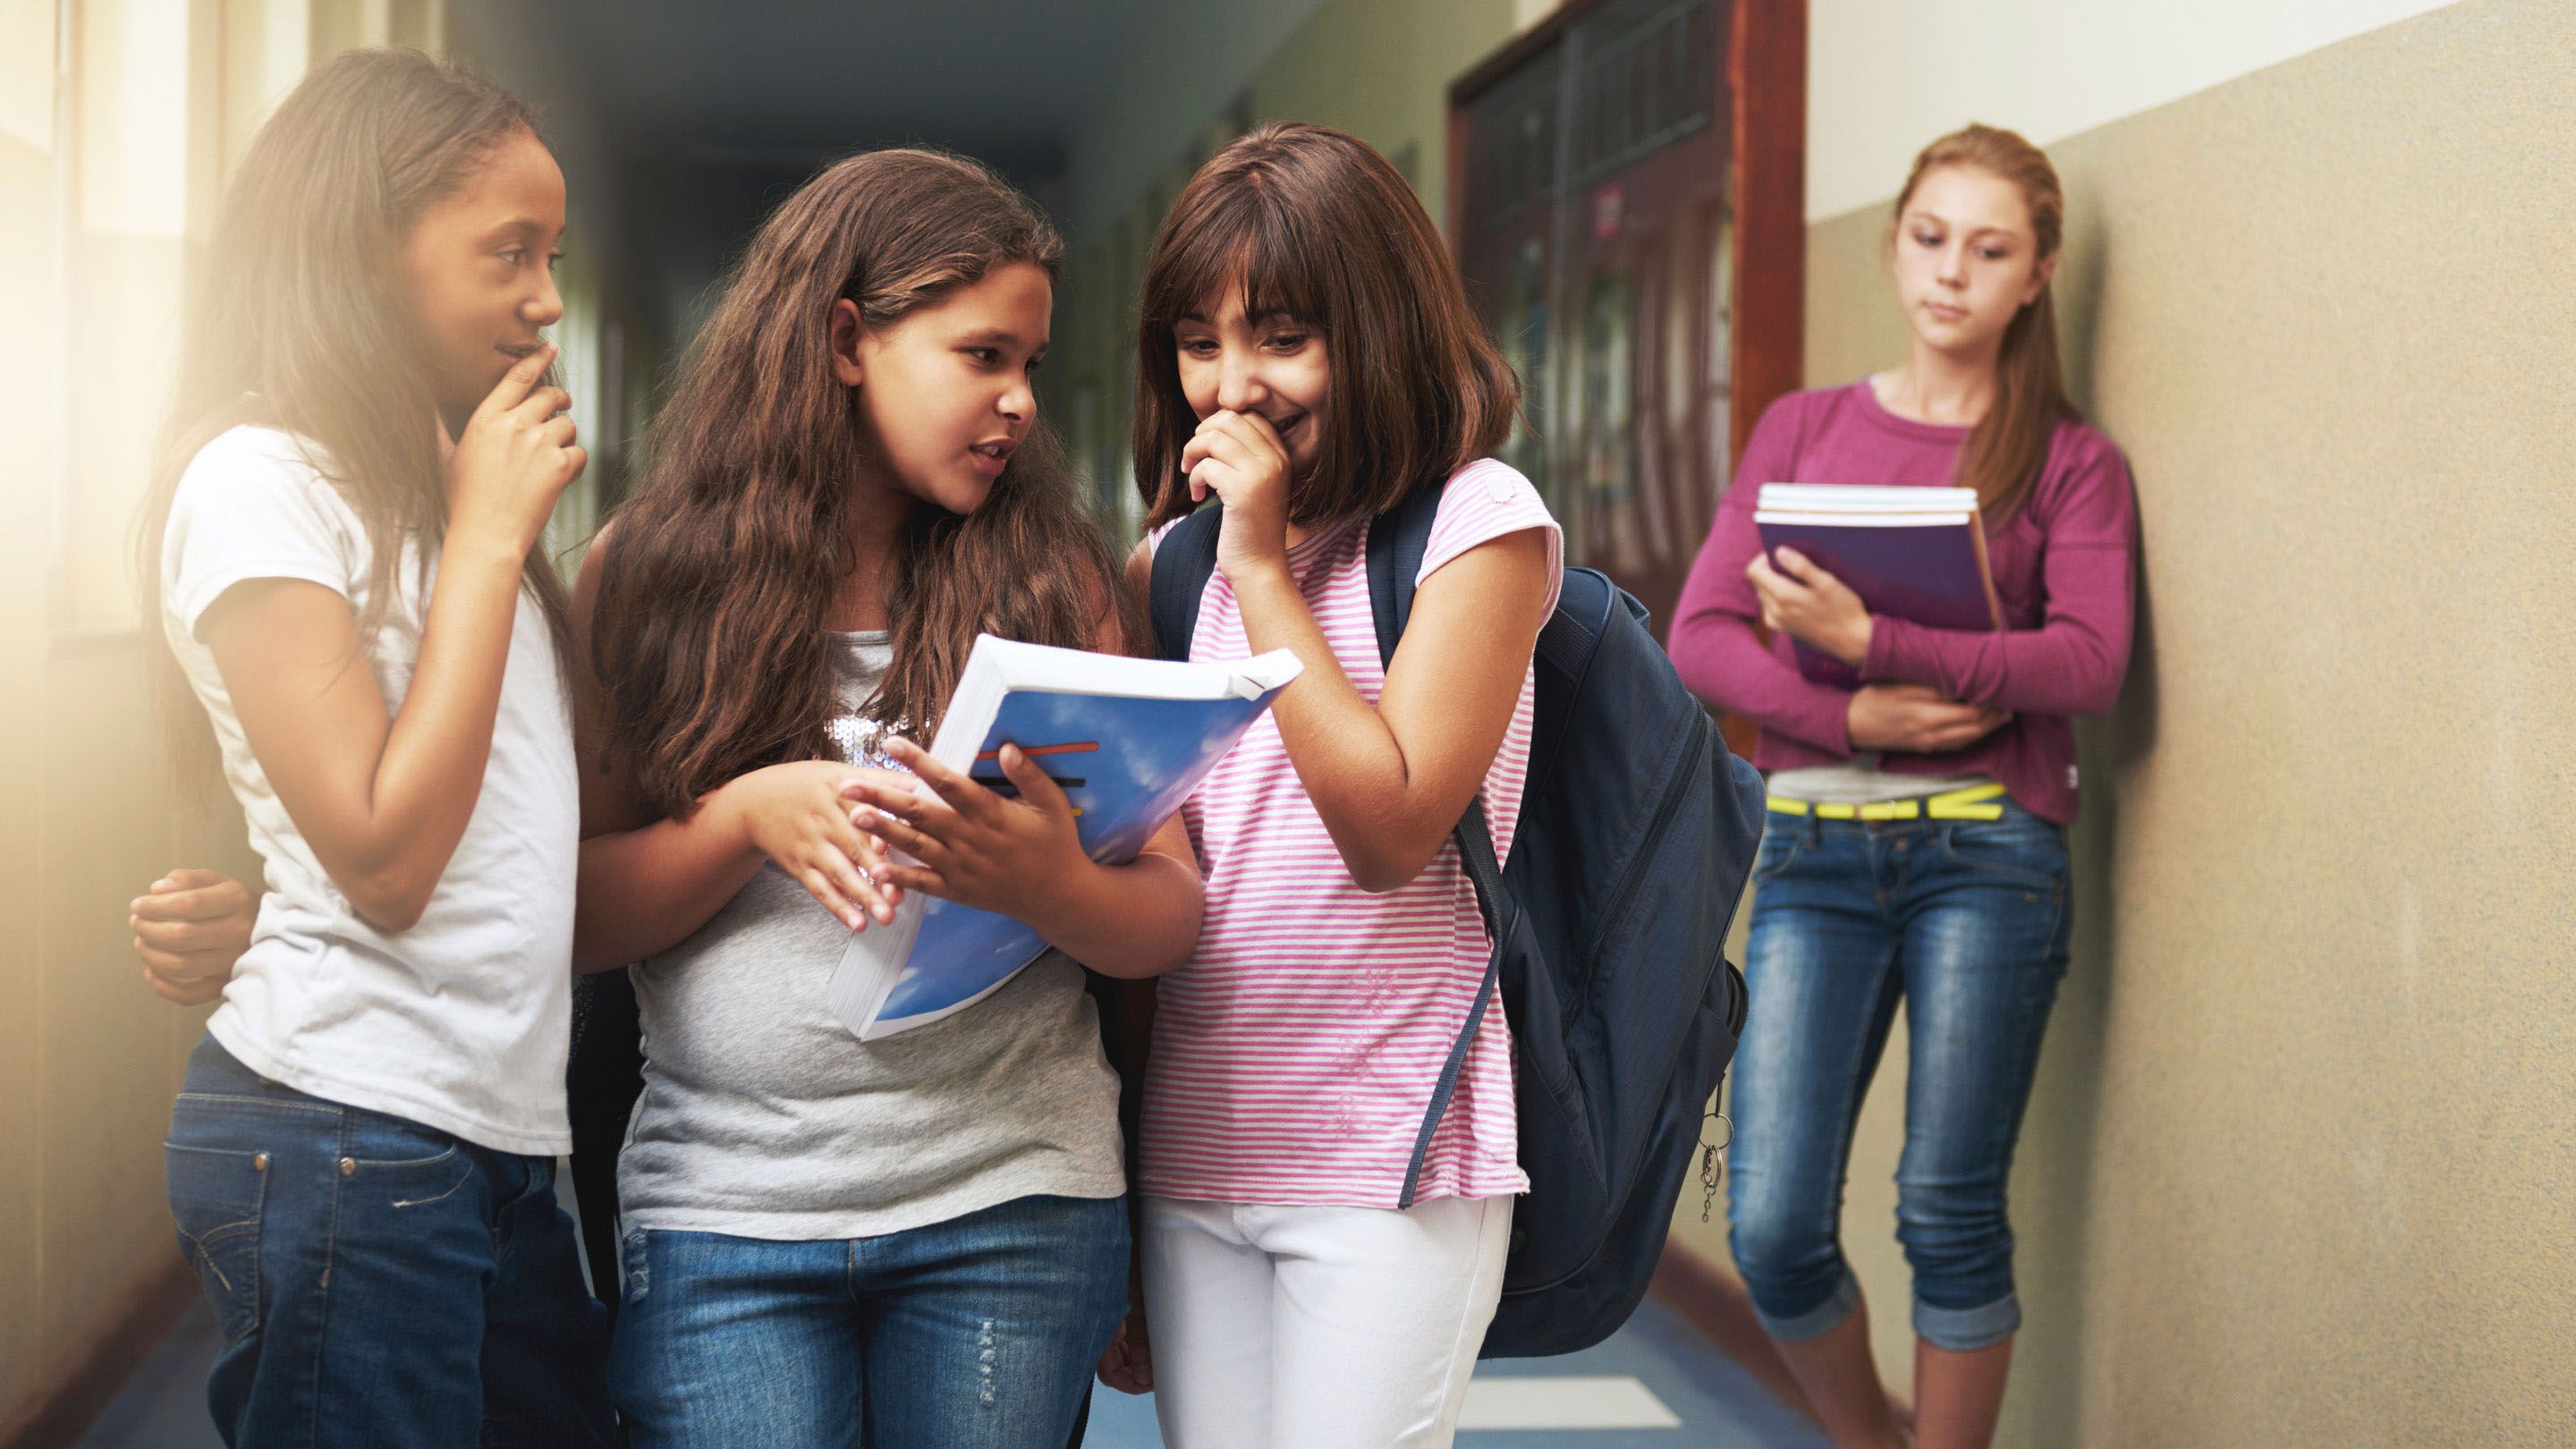 What Is Identity-Based Bullying—and How Can I Stop It? | Edutopia